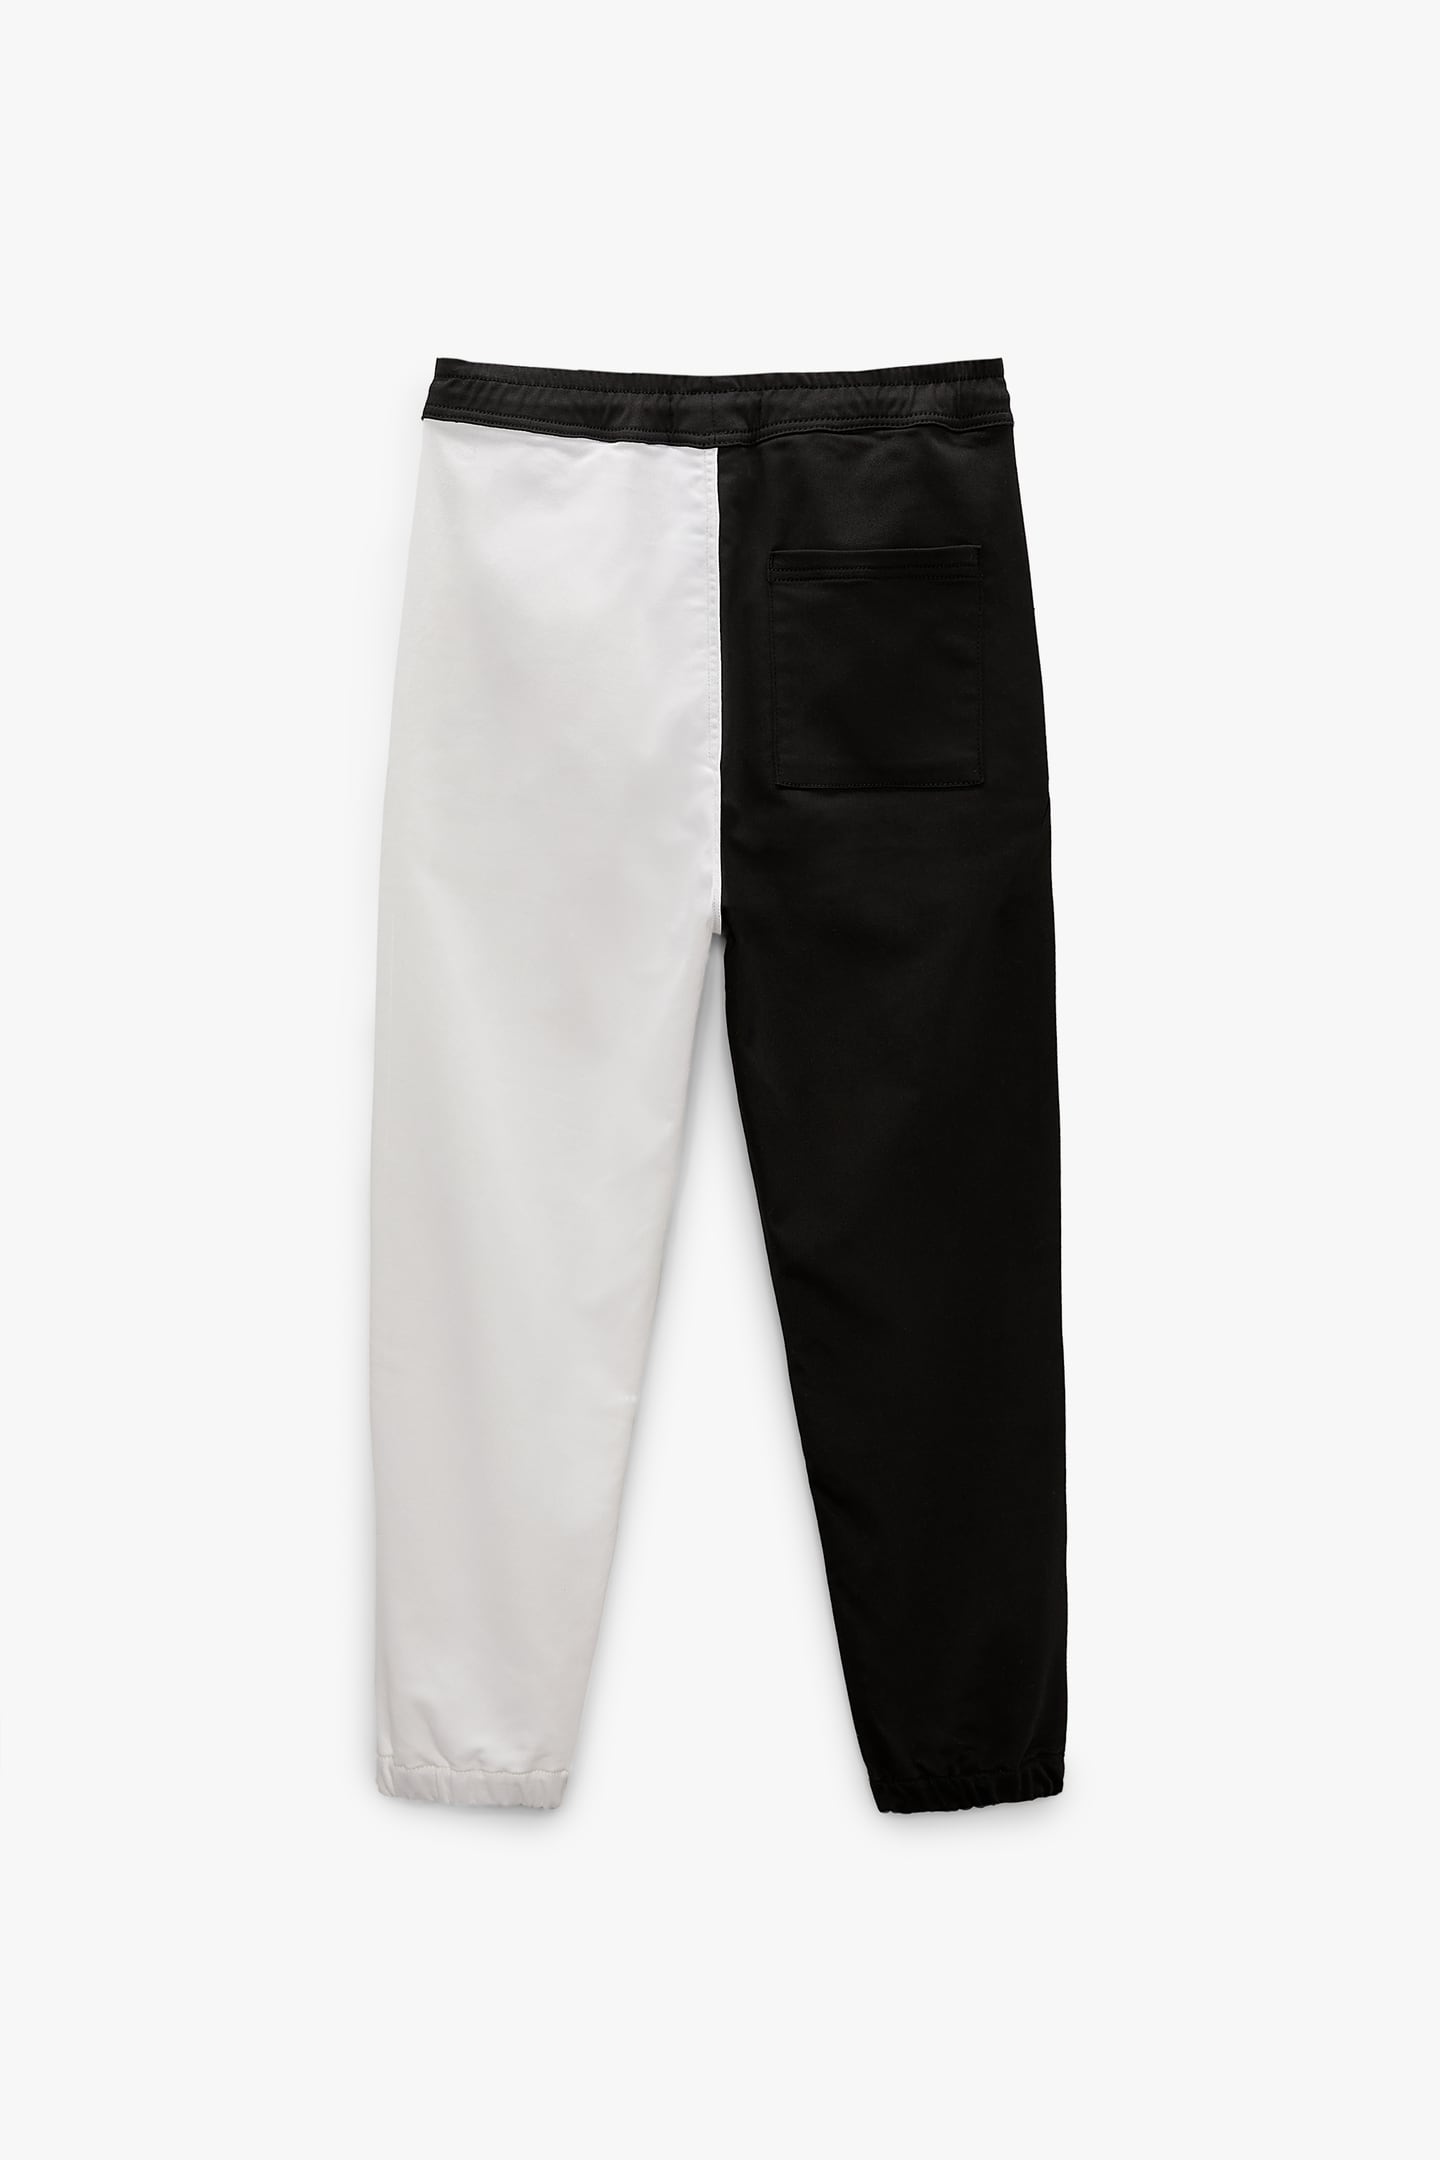 https://www.styched.in/cdn/shop/products/White_BlackComfyCoolPants4_2.jpg?v=1644589634&width=1445